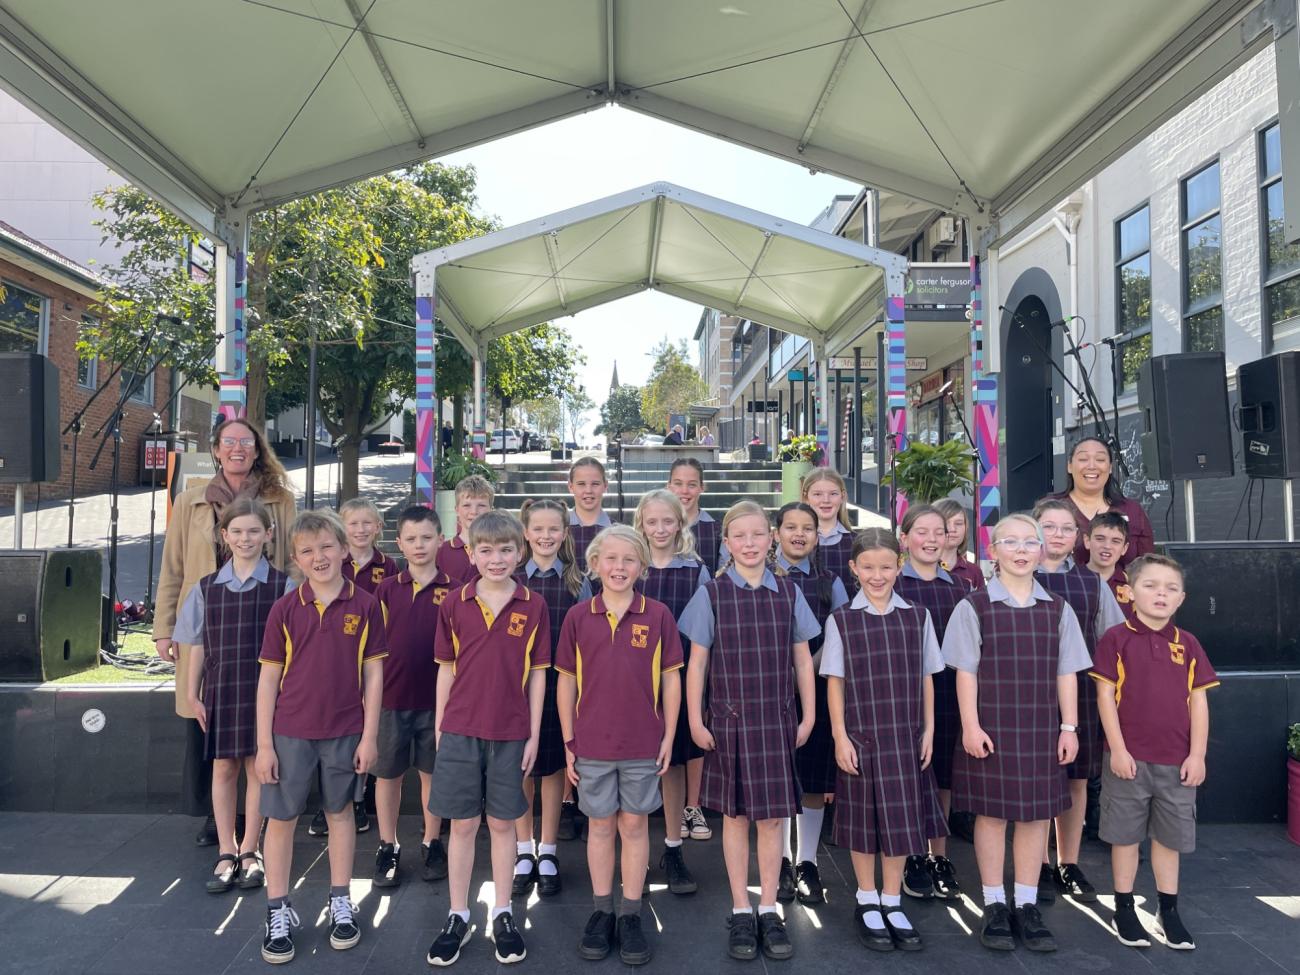 Corrimal East Public School Choir standing in front of the stage in school uniform for photo